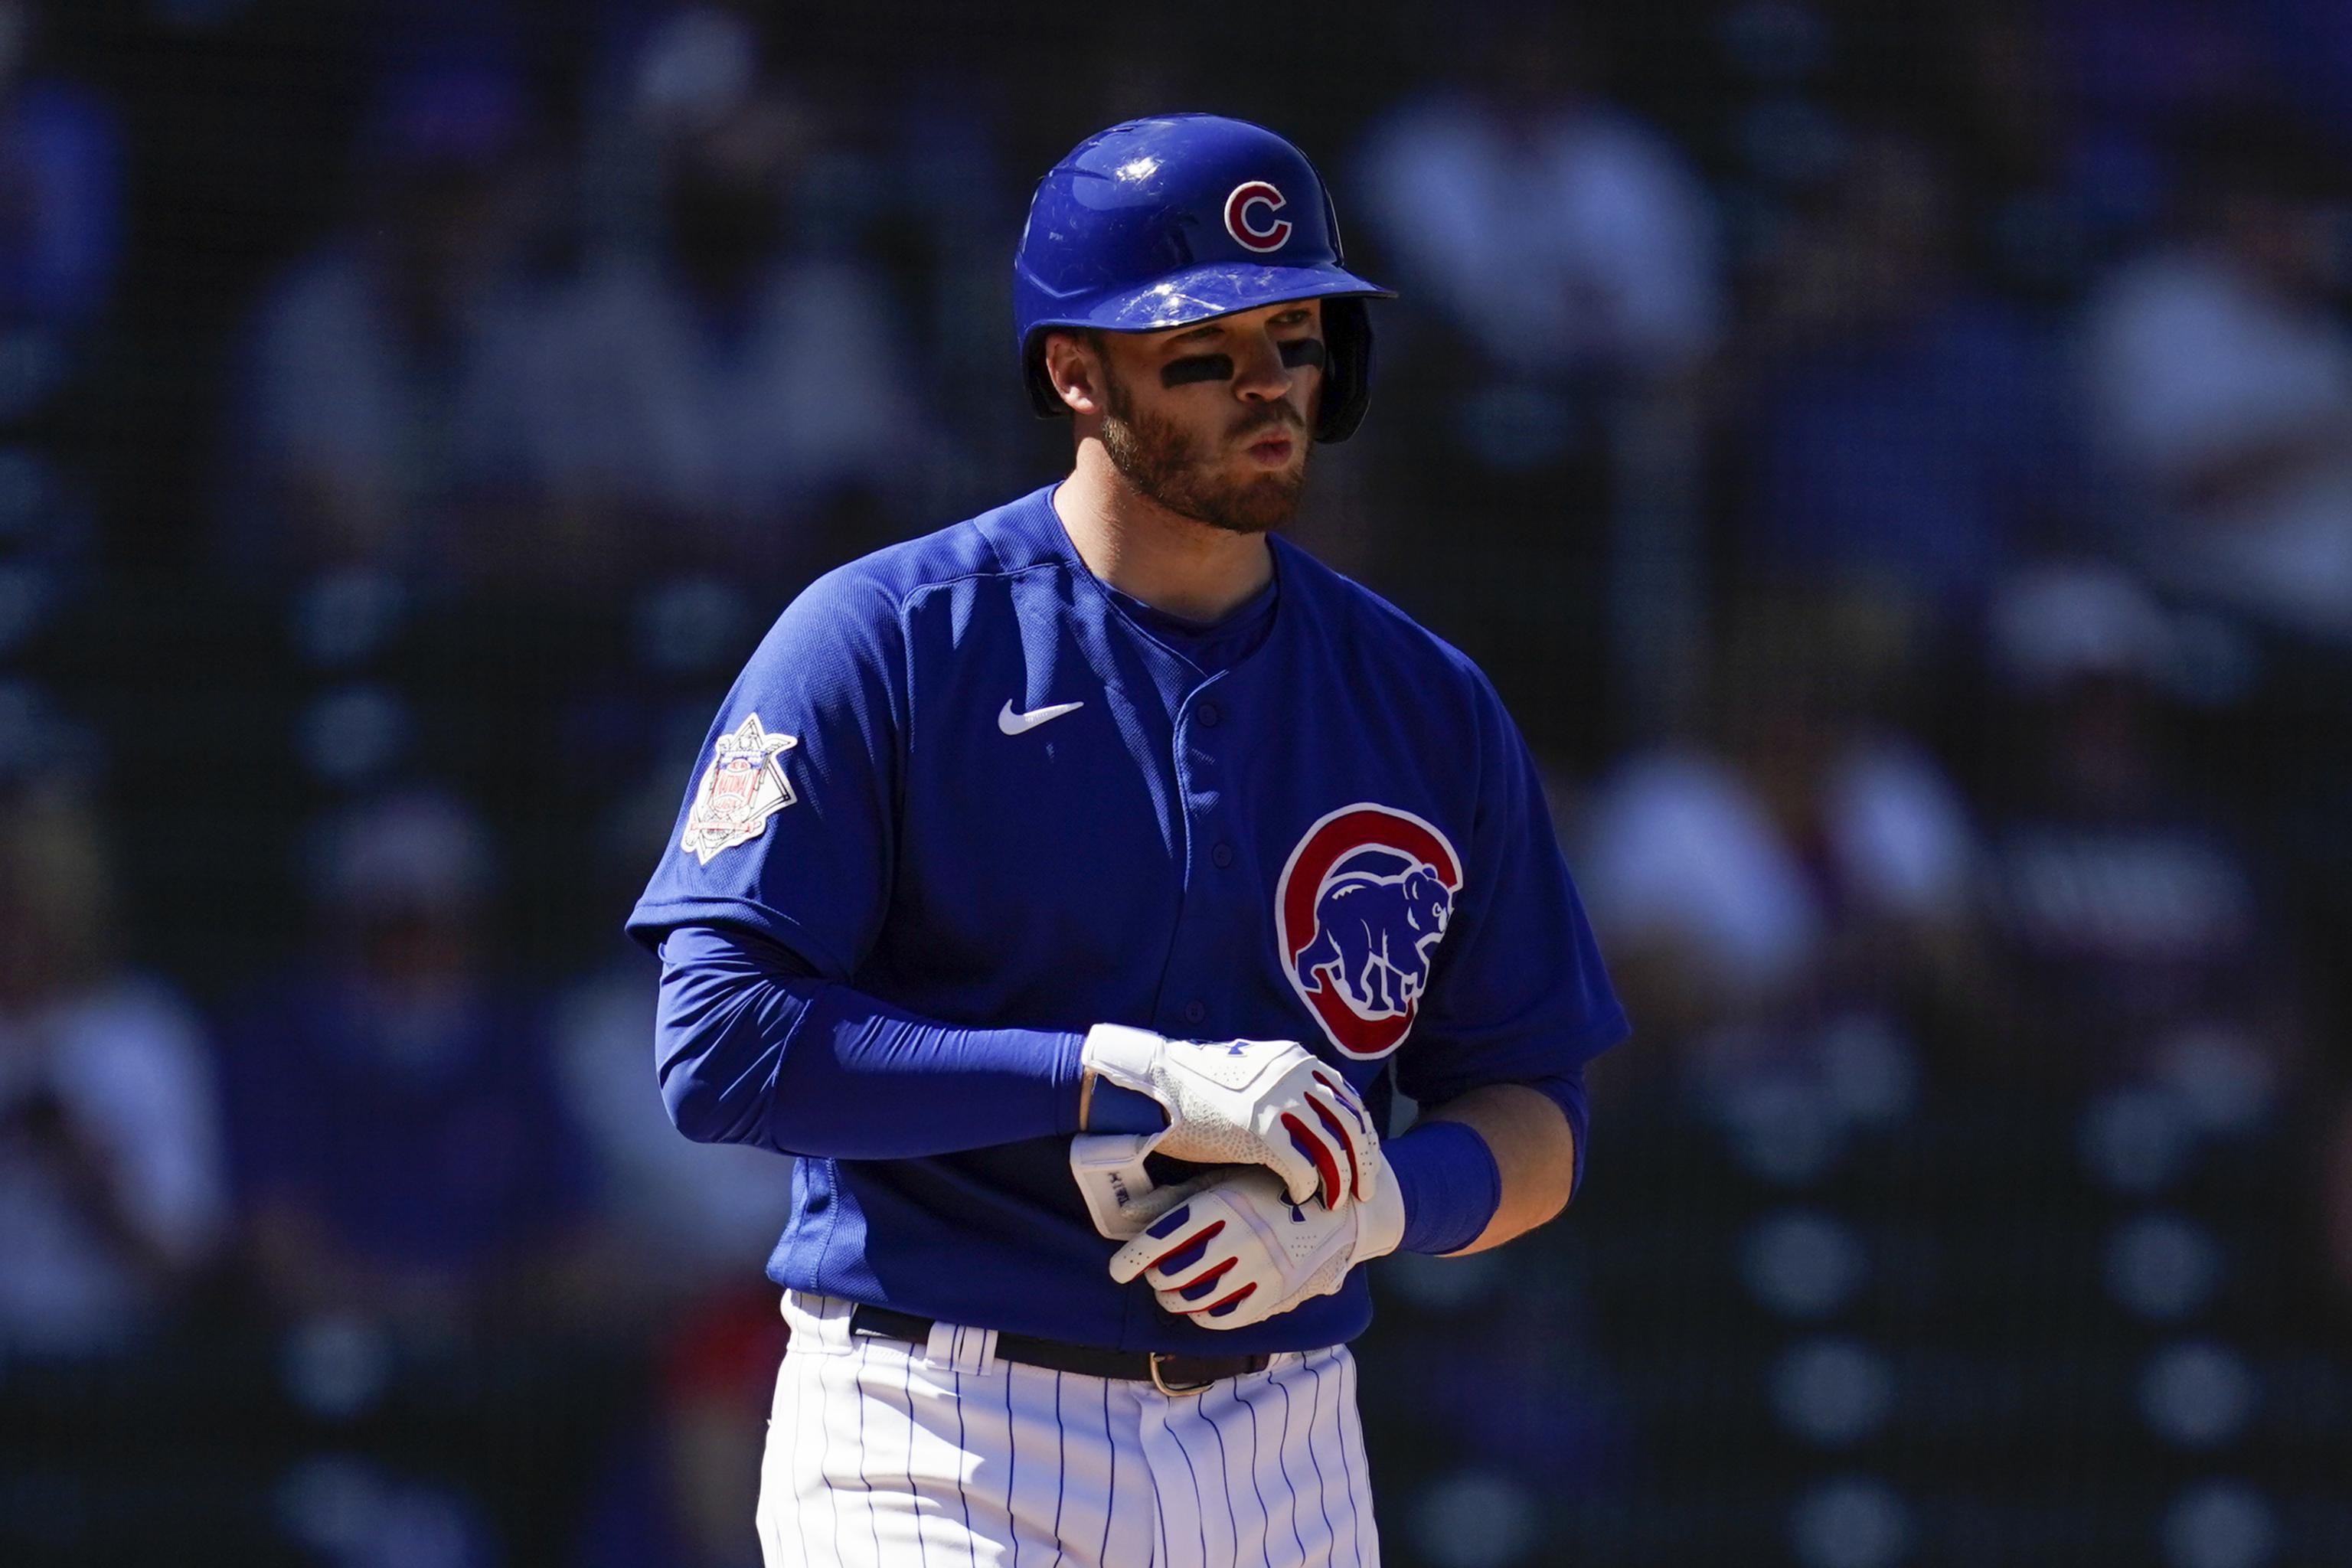 Cubs' Ian Happ Carted off with Injury vs. Reds After Collision